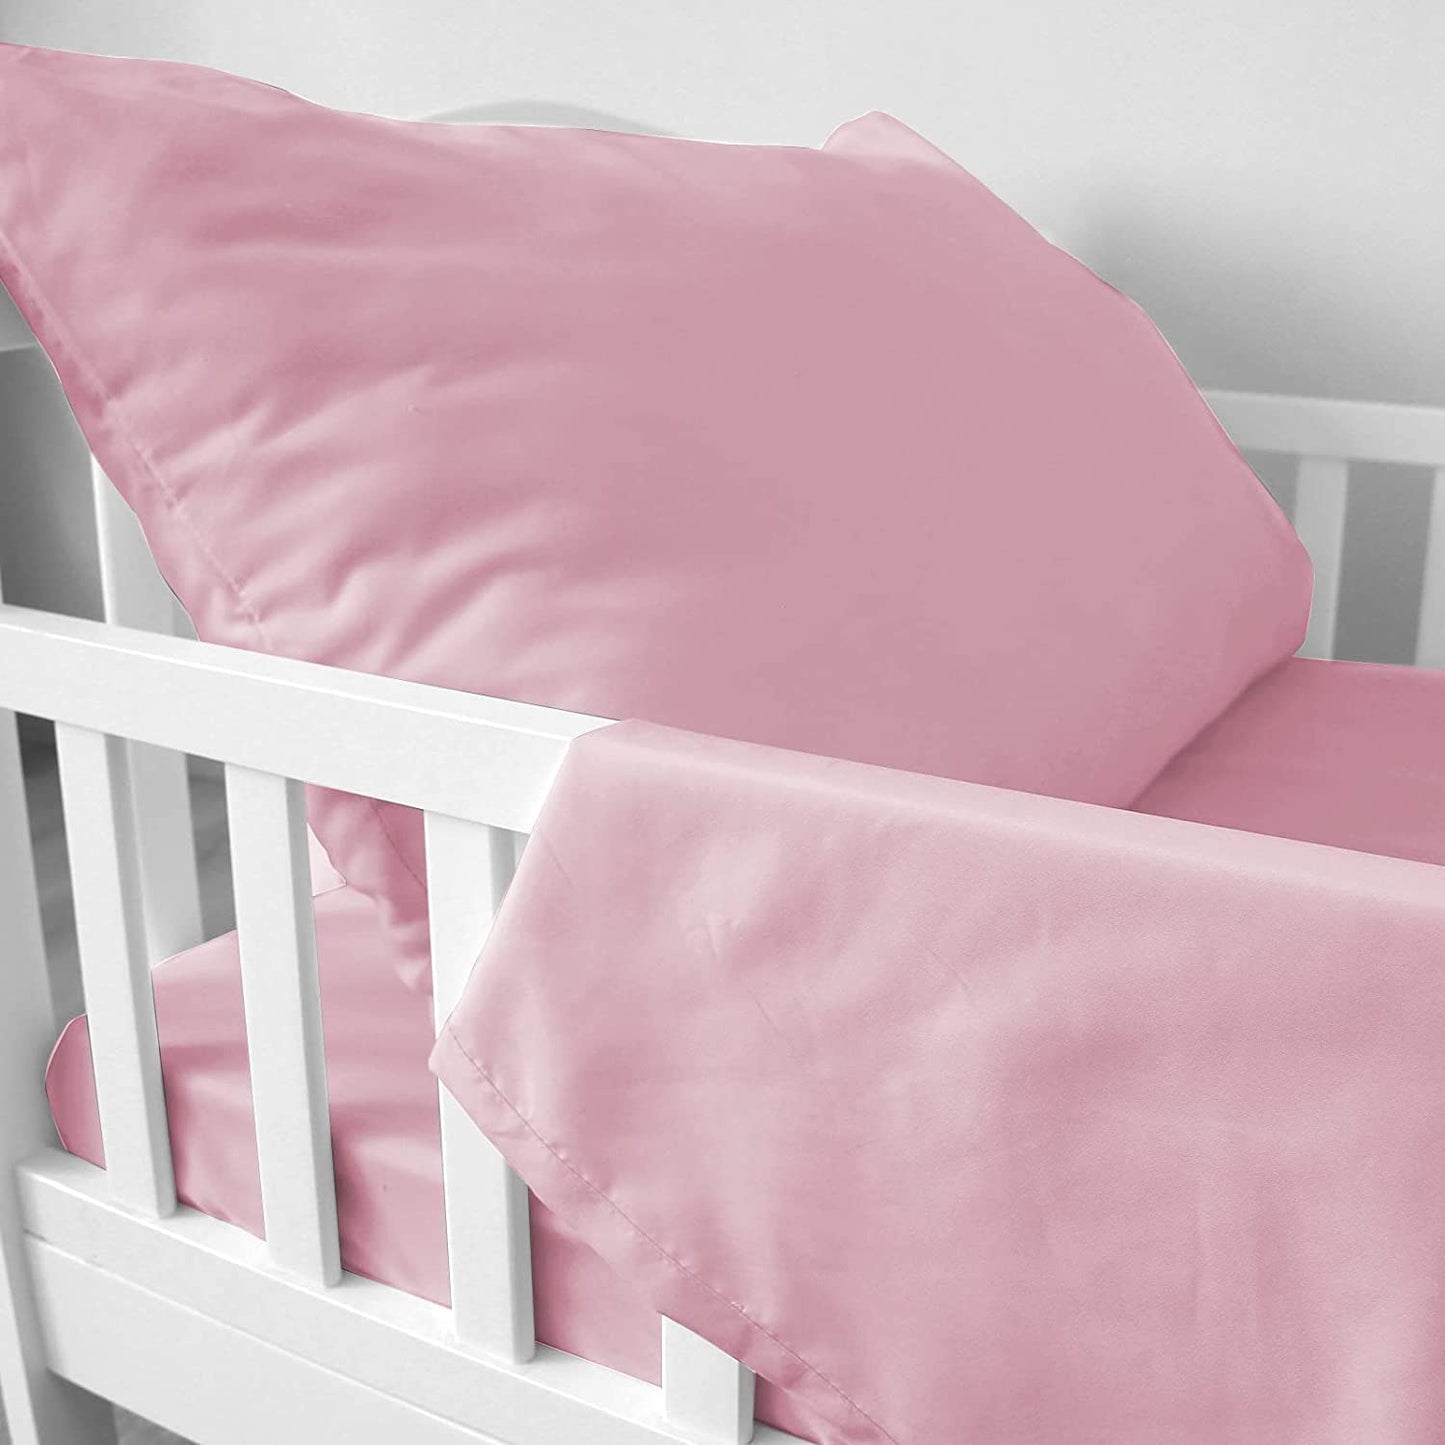 Toddler Bedding Set - 3 Pieces, Includes a Crib Fitted Sheet, Flat Sheet and Envelope Pillowcase, Soft and Breathable, Pink